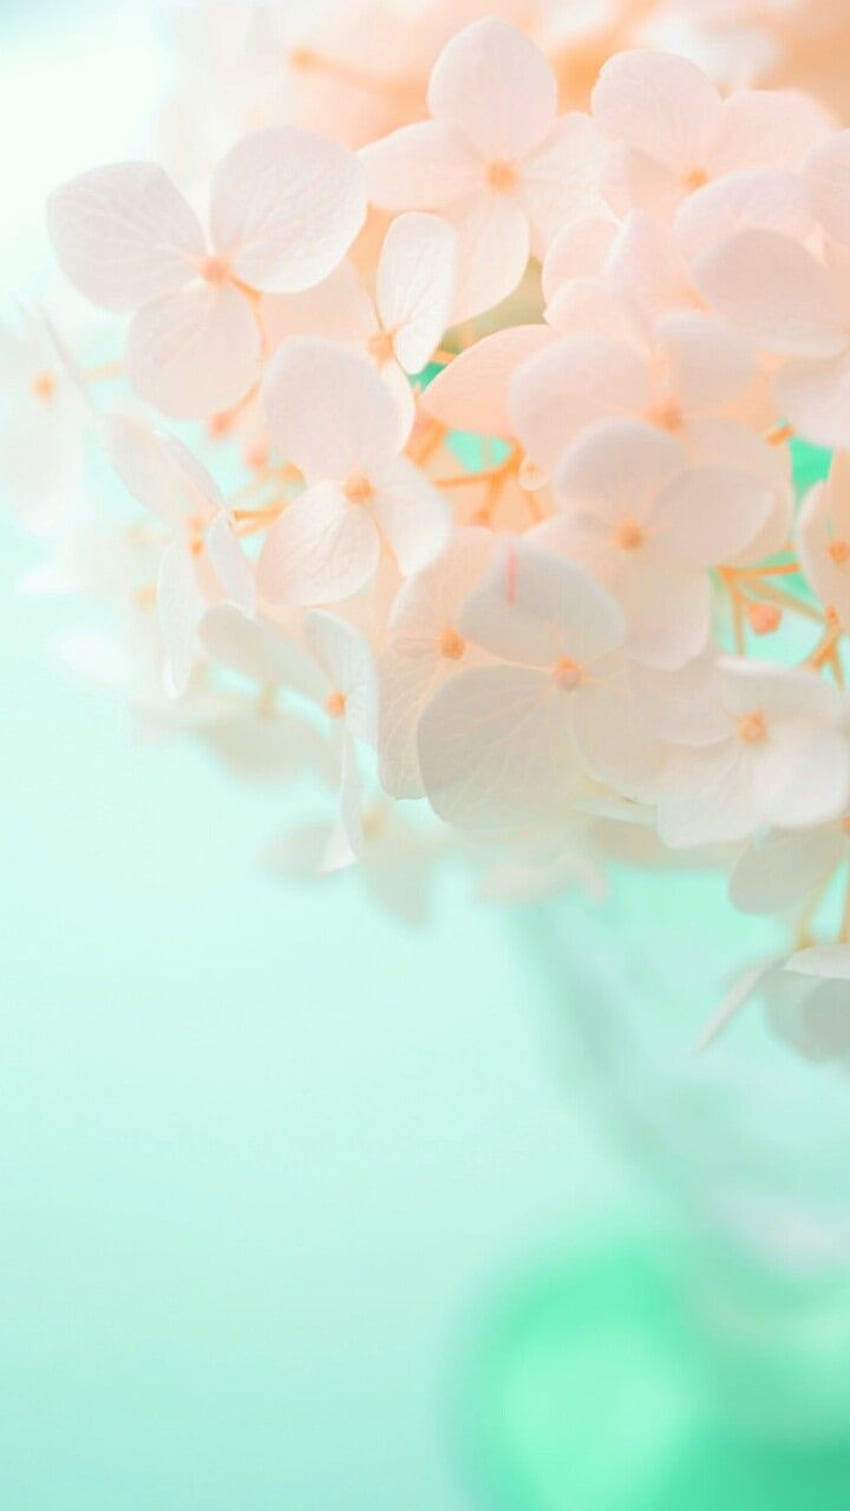 art, background, beautiful, beauty, colorful, design, drops, flowers, green, inspiration, leaves, luxury, nature, pastel, pink flowers, pretty, soft, softy, still life, style, , we heart it, pastel flowers, pastel color, beauty flowers HD phone wallpaper